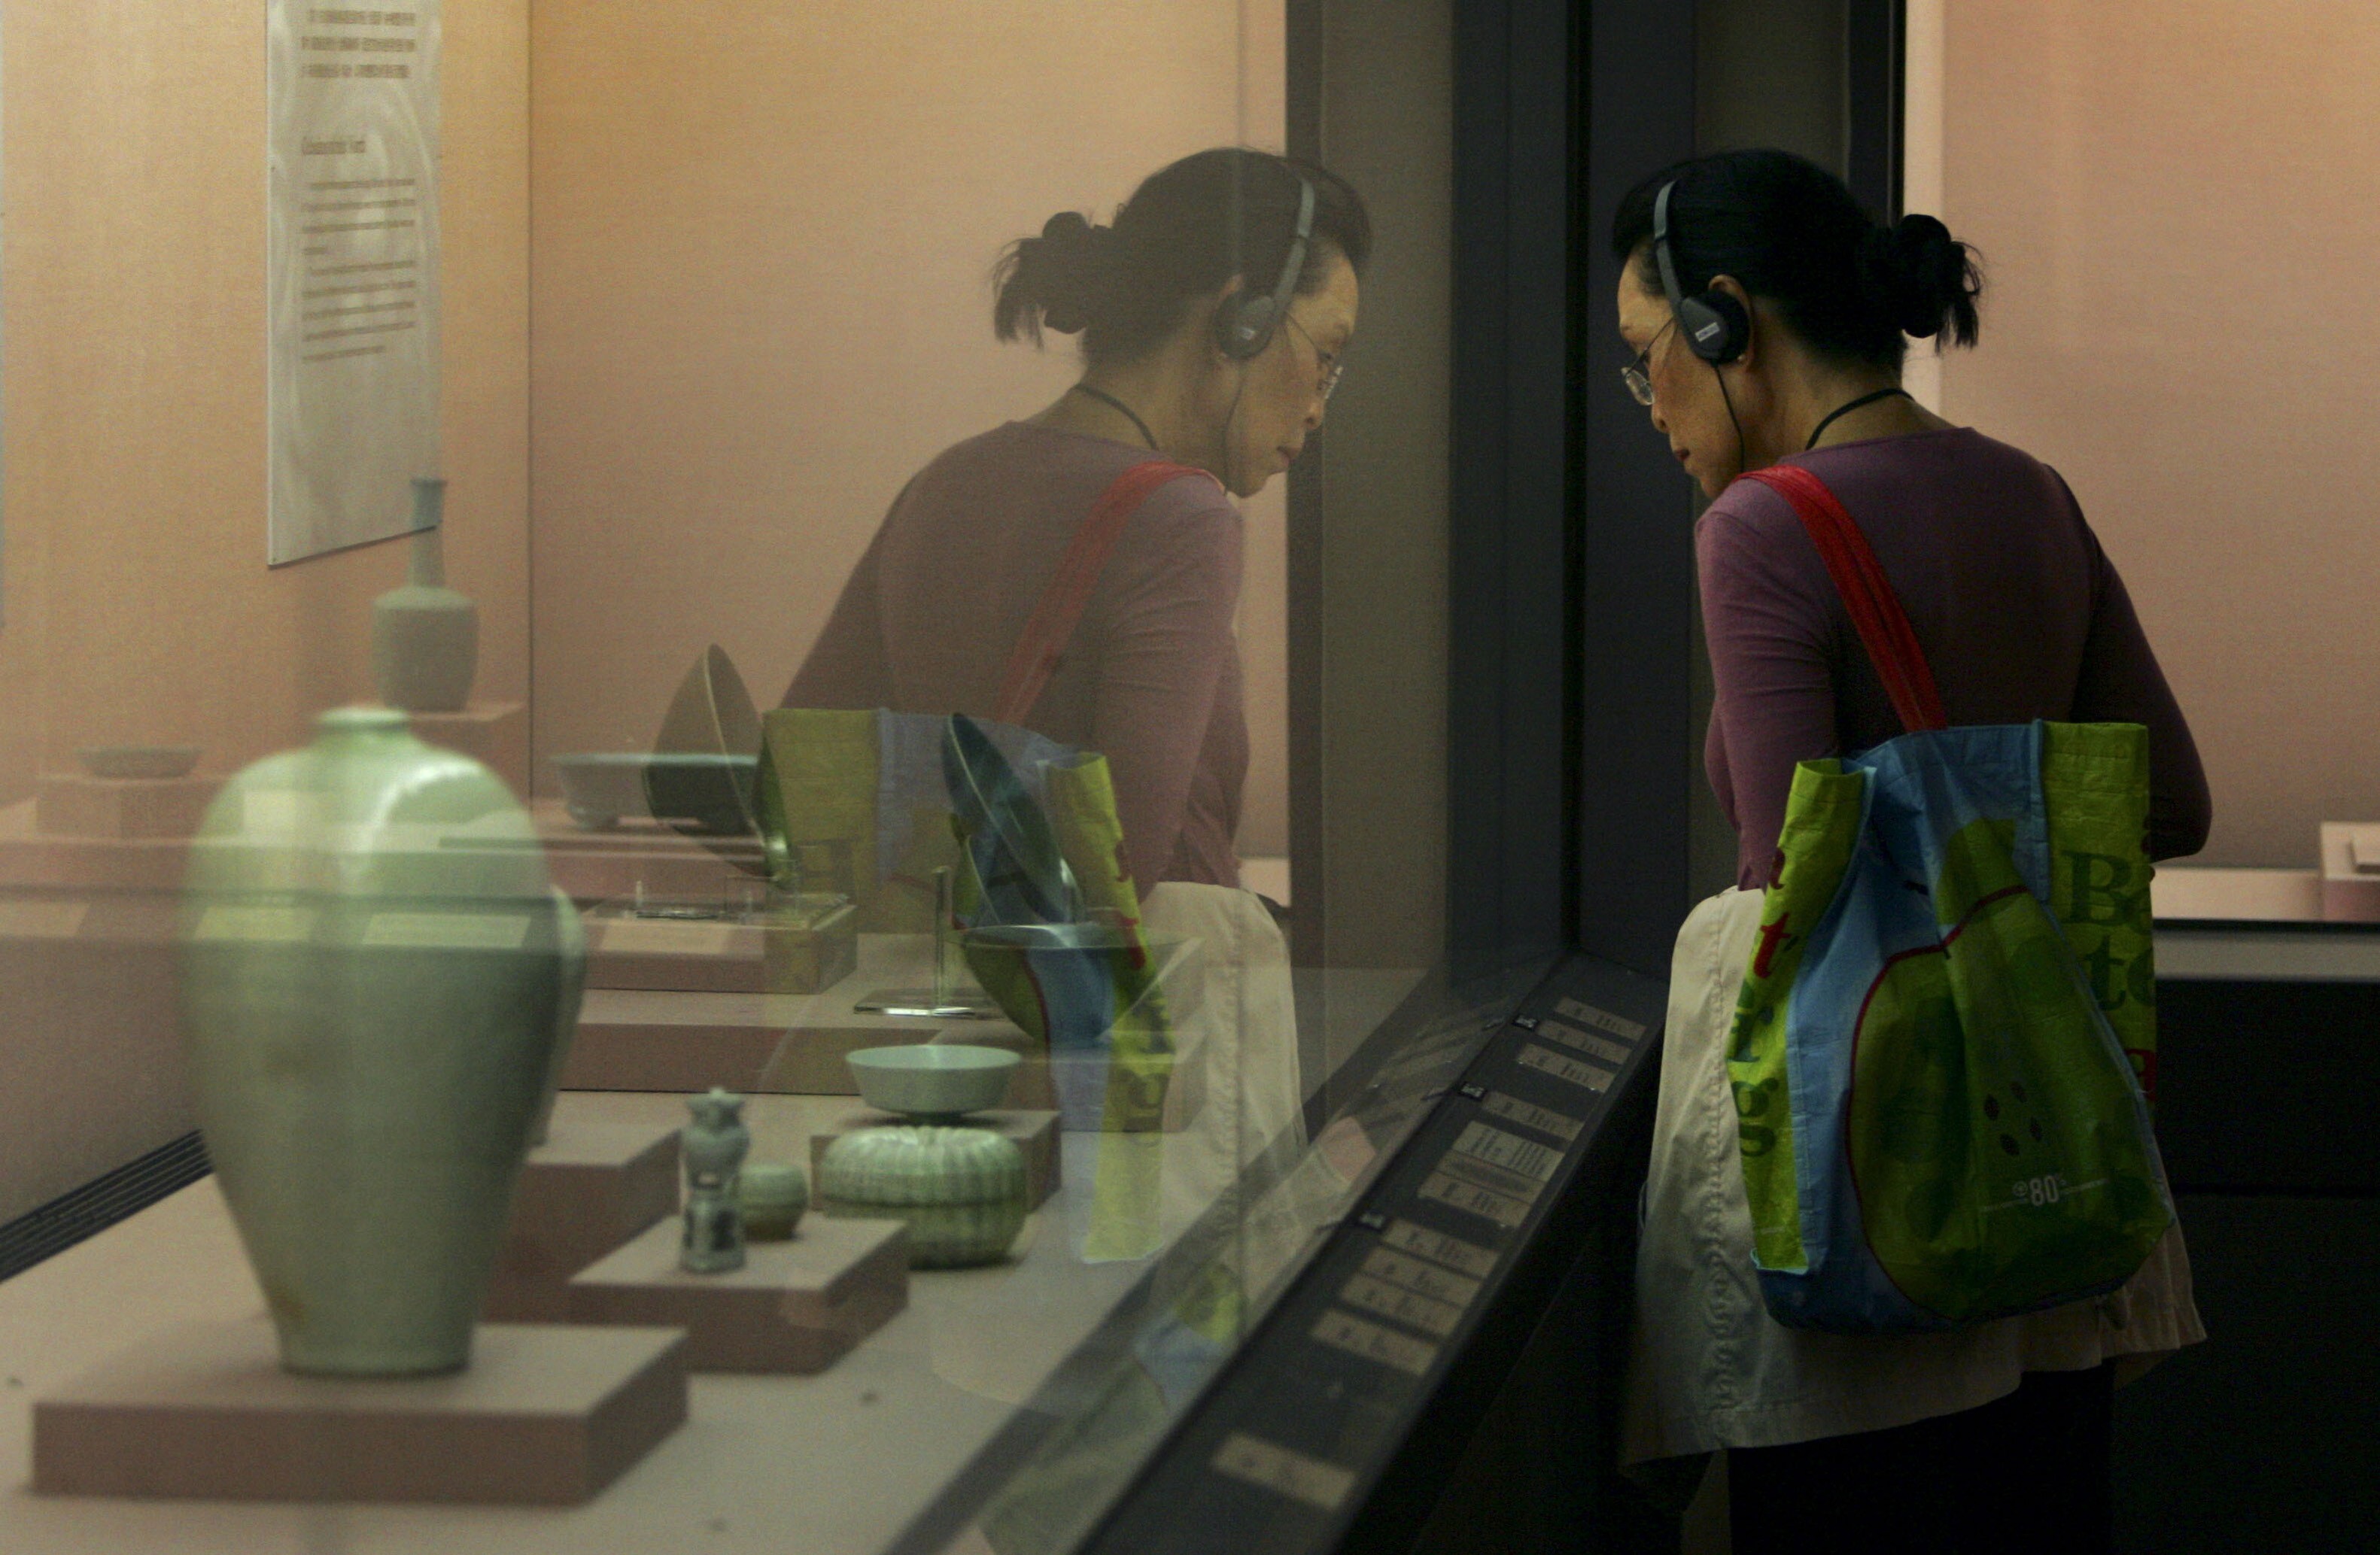 A visitor admires exhibits at the National Palace Museum in Taipei, Taiwan, in April 2009. The internationally renowned museum houses artefacts from China’s imperial era. Photo: AP